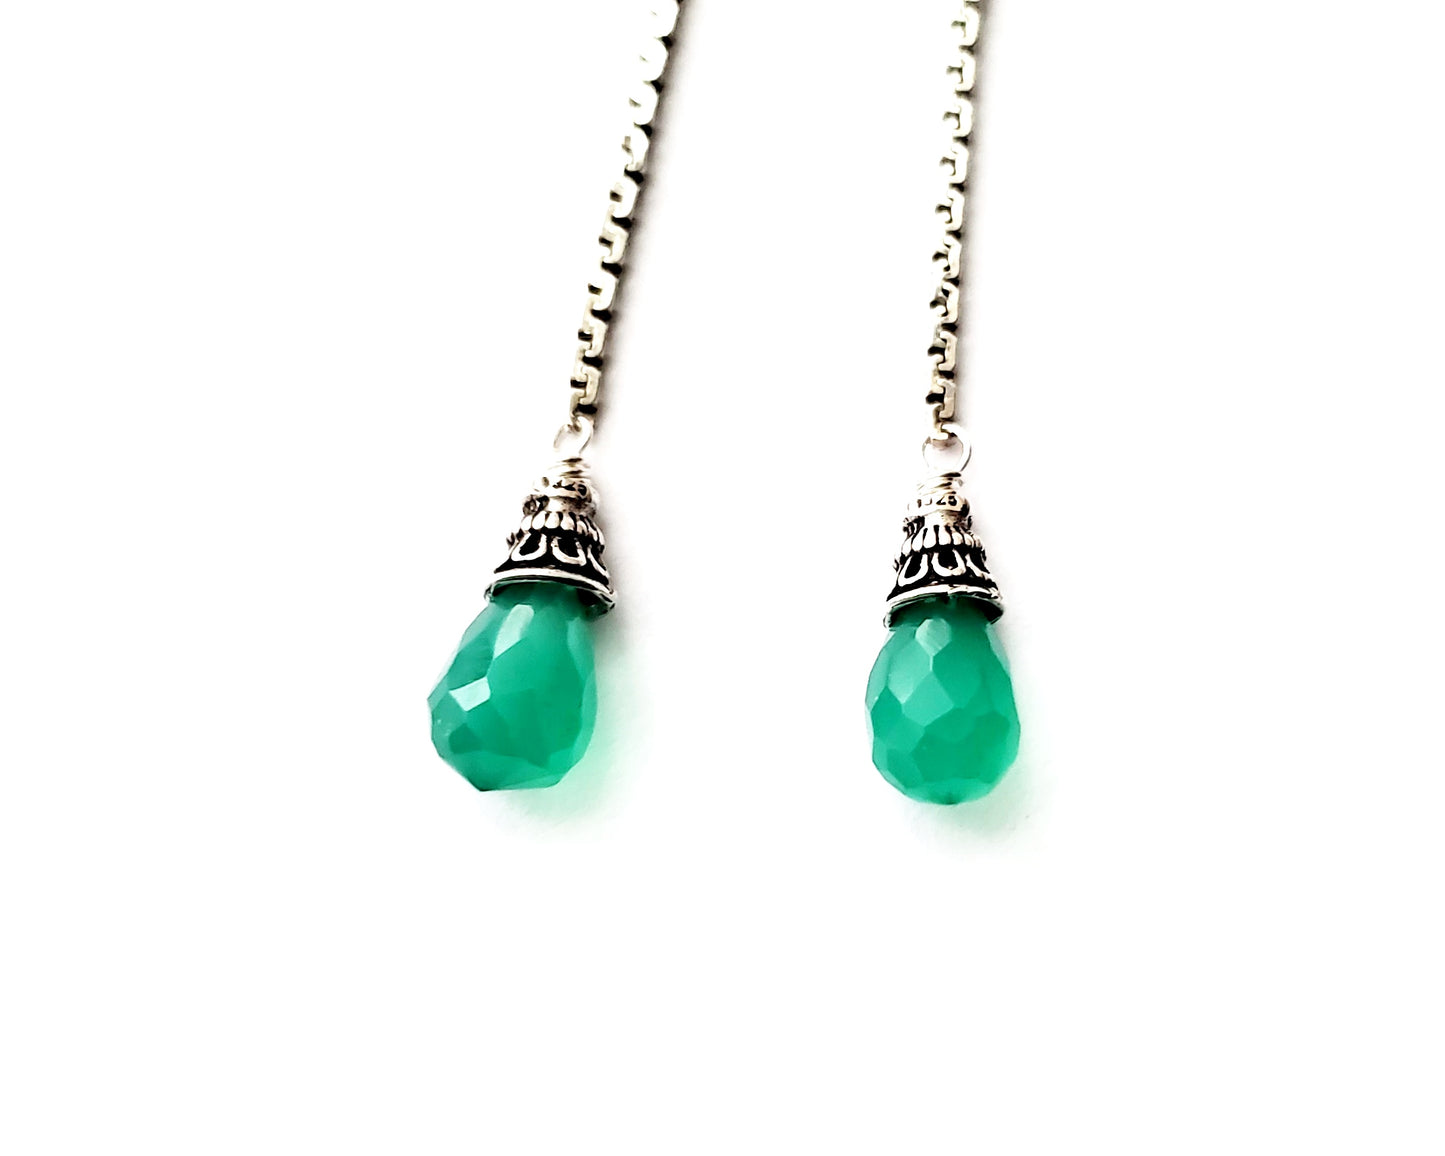 Long Green Onyx Art Deco Inspired Earrings, Sterling Silver, Threader Earrings, Art Deco, Green Onyx, Green Stone, Upcycled Silver